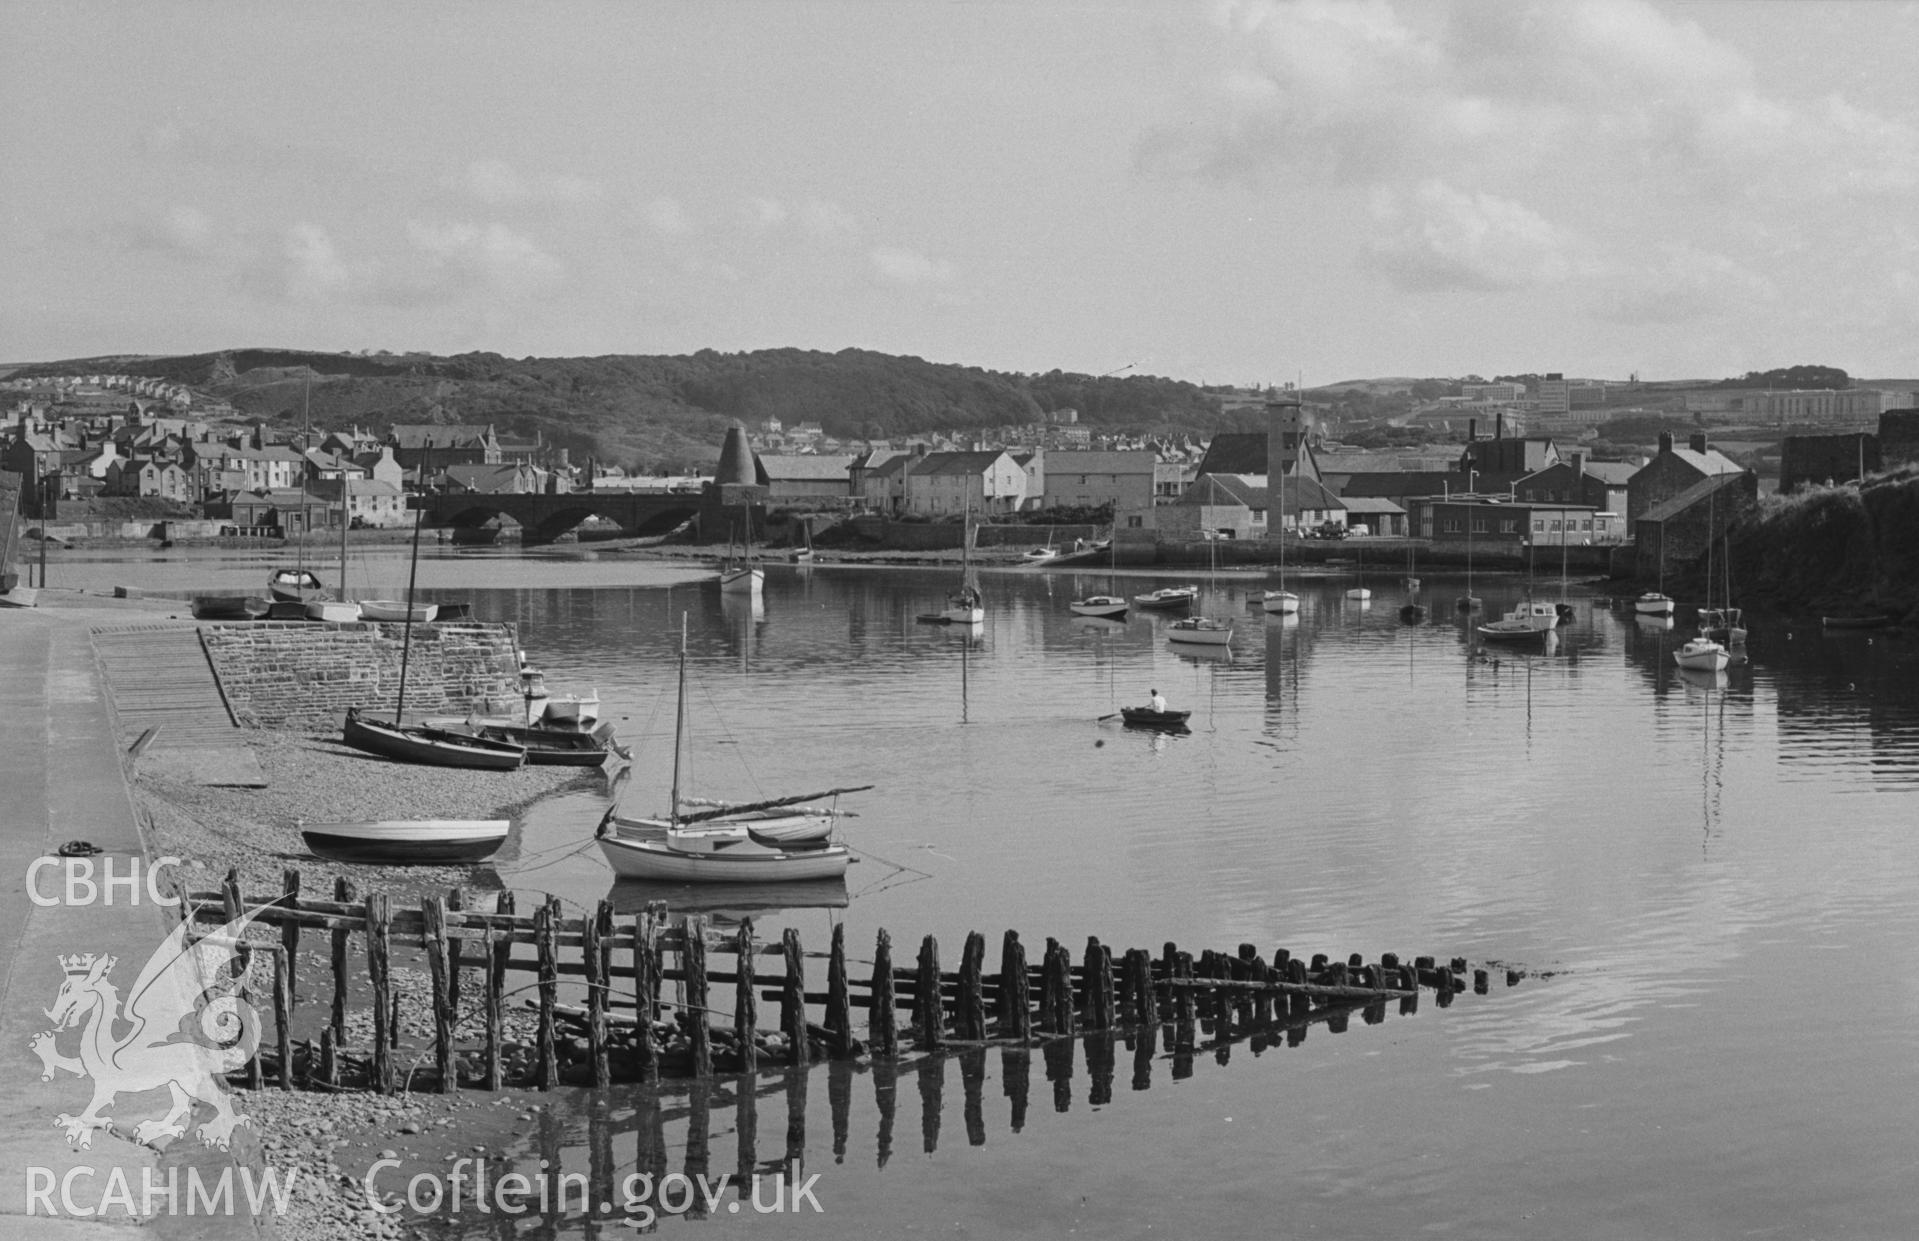 Digital copy of a black and white negative showing view looking across Aberystwyth harbour from the south end of the Promenade. Photographed by Arthur O. Chater on 25th August 1967 looking north east from Grid Reference SN 580 810.